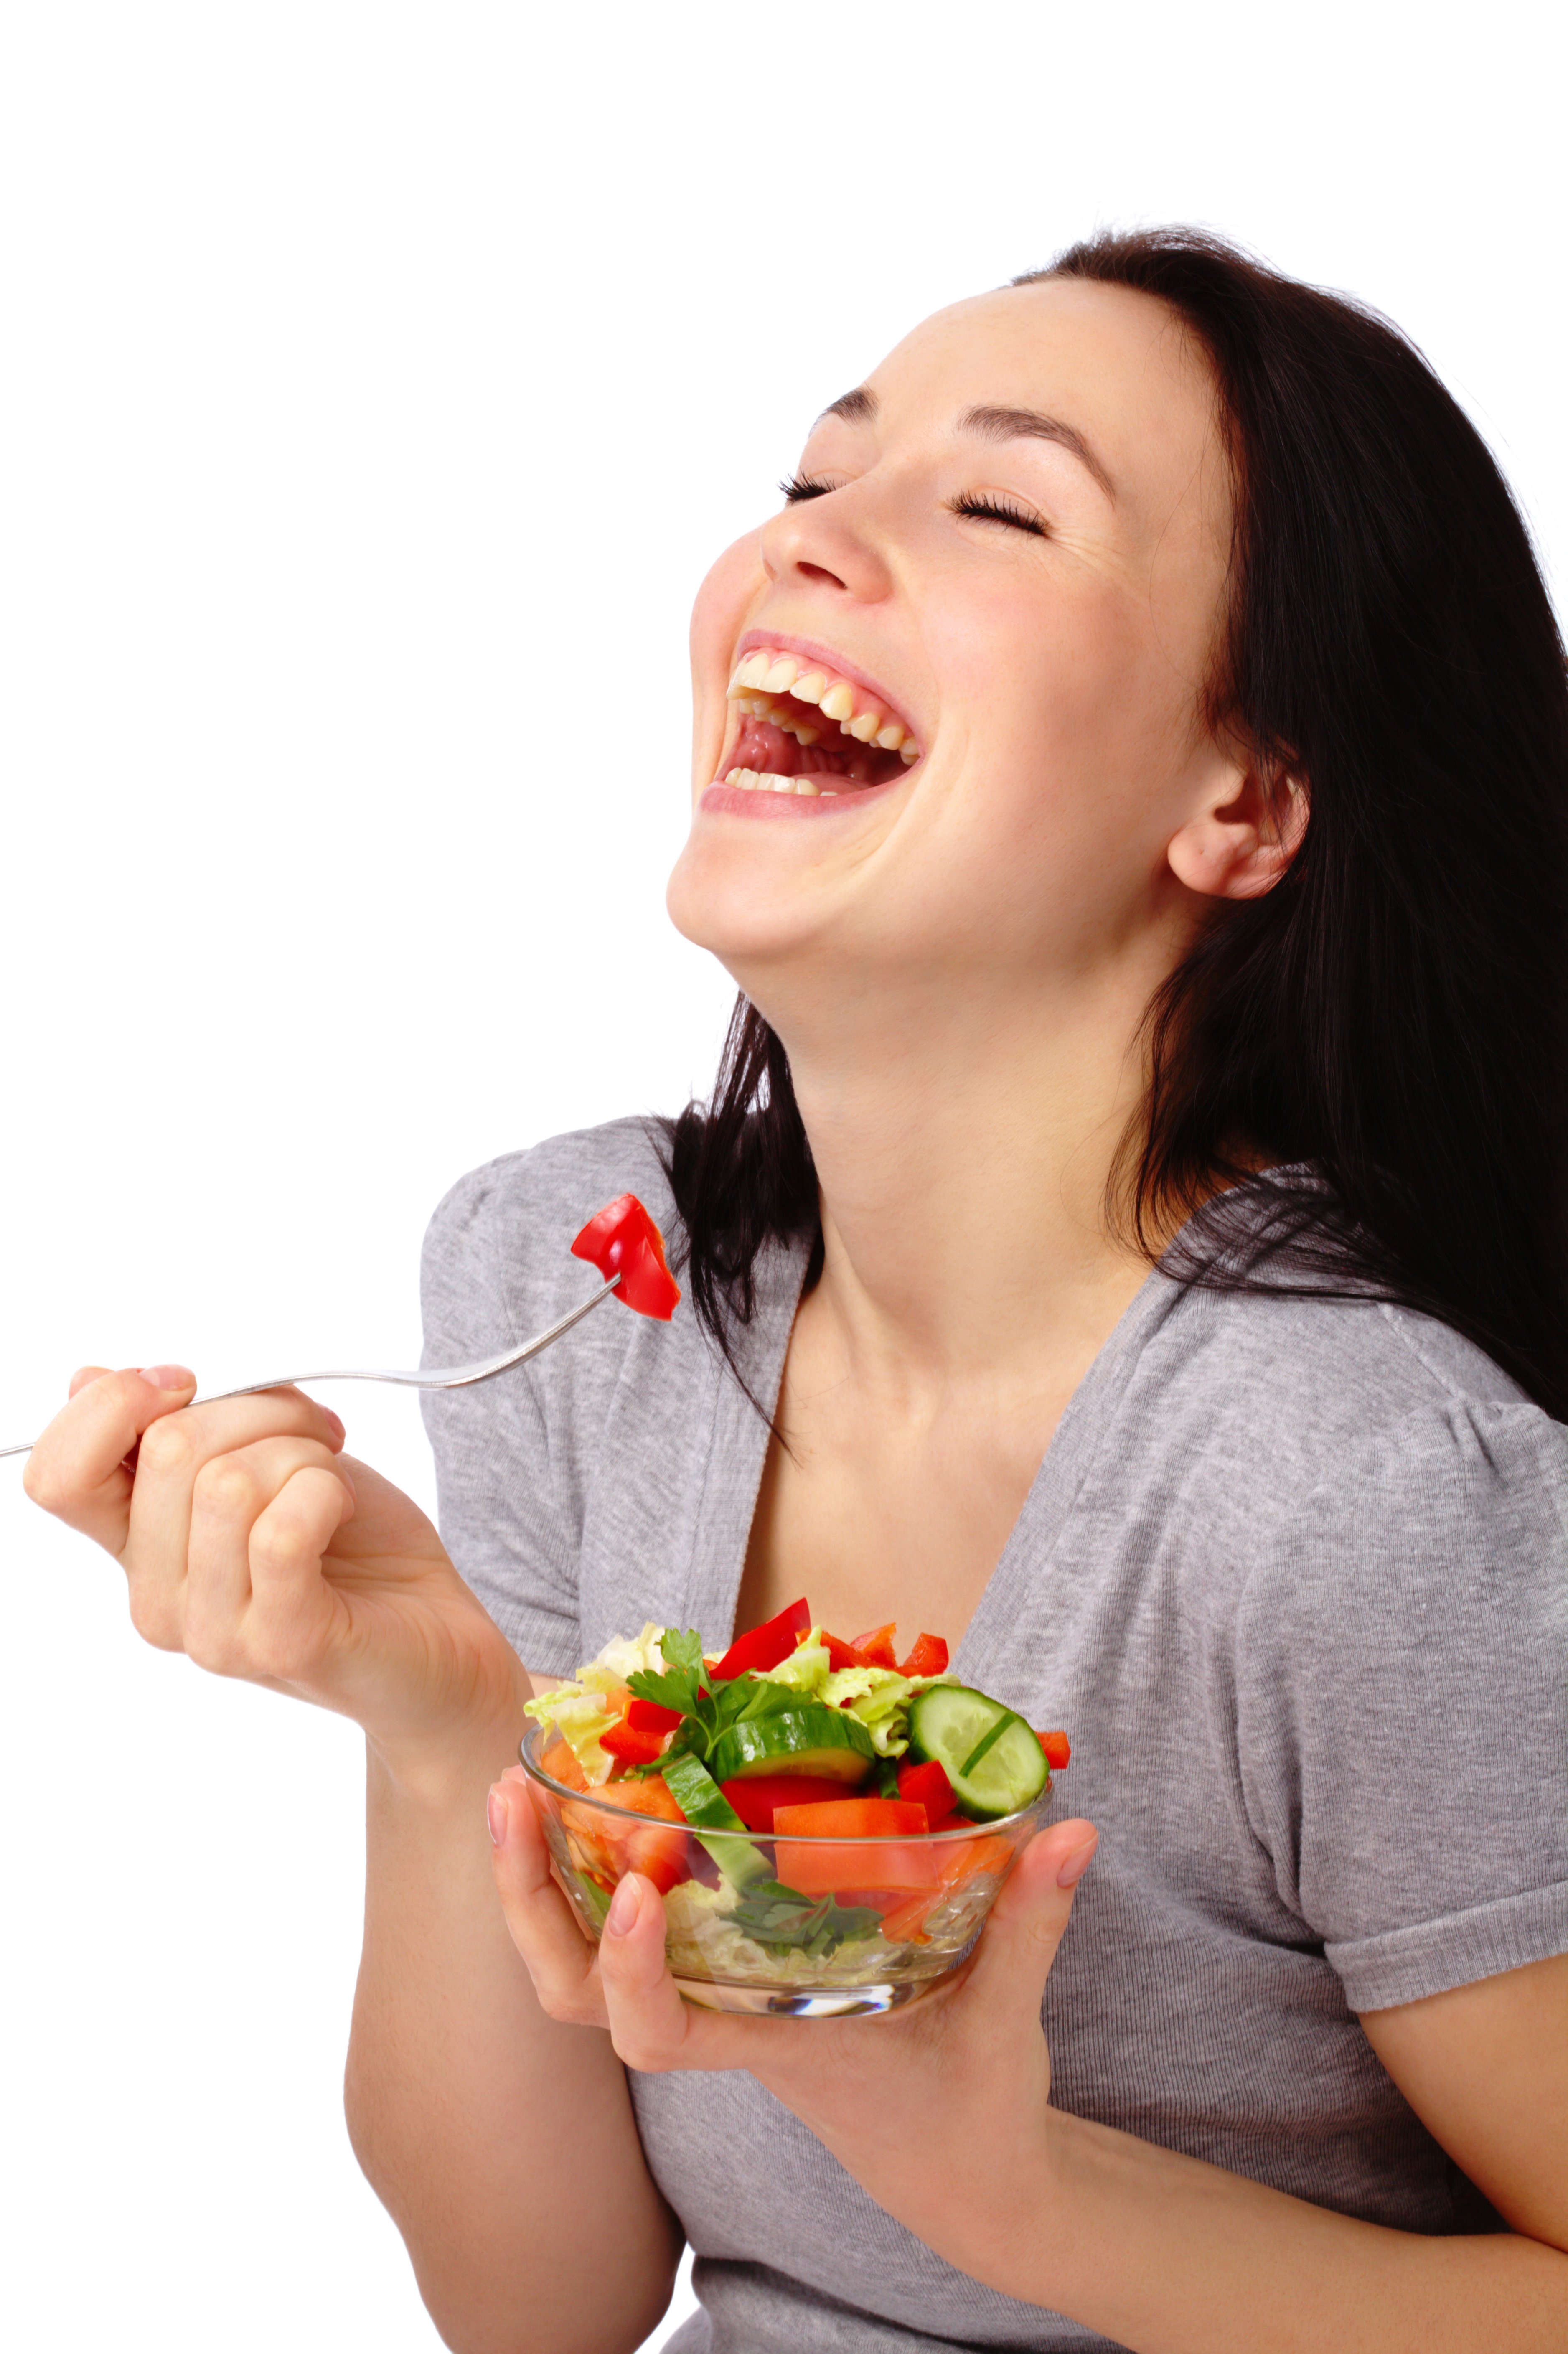 25 Best Memes About Stock Photo Woman Eating Salad Meme Stock Photo Woman Eating Salad Memes